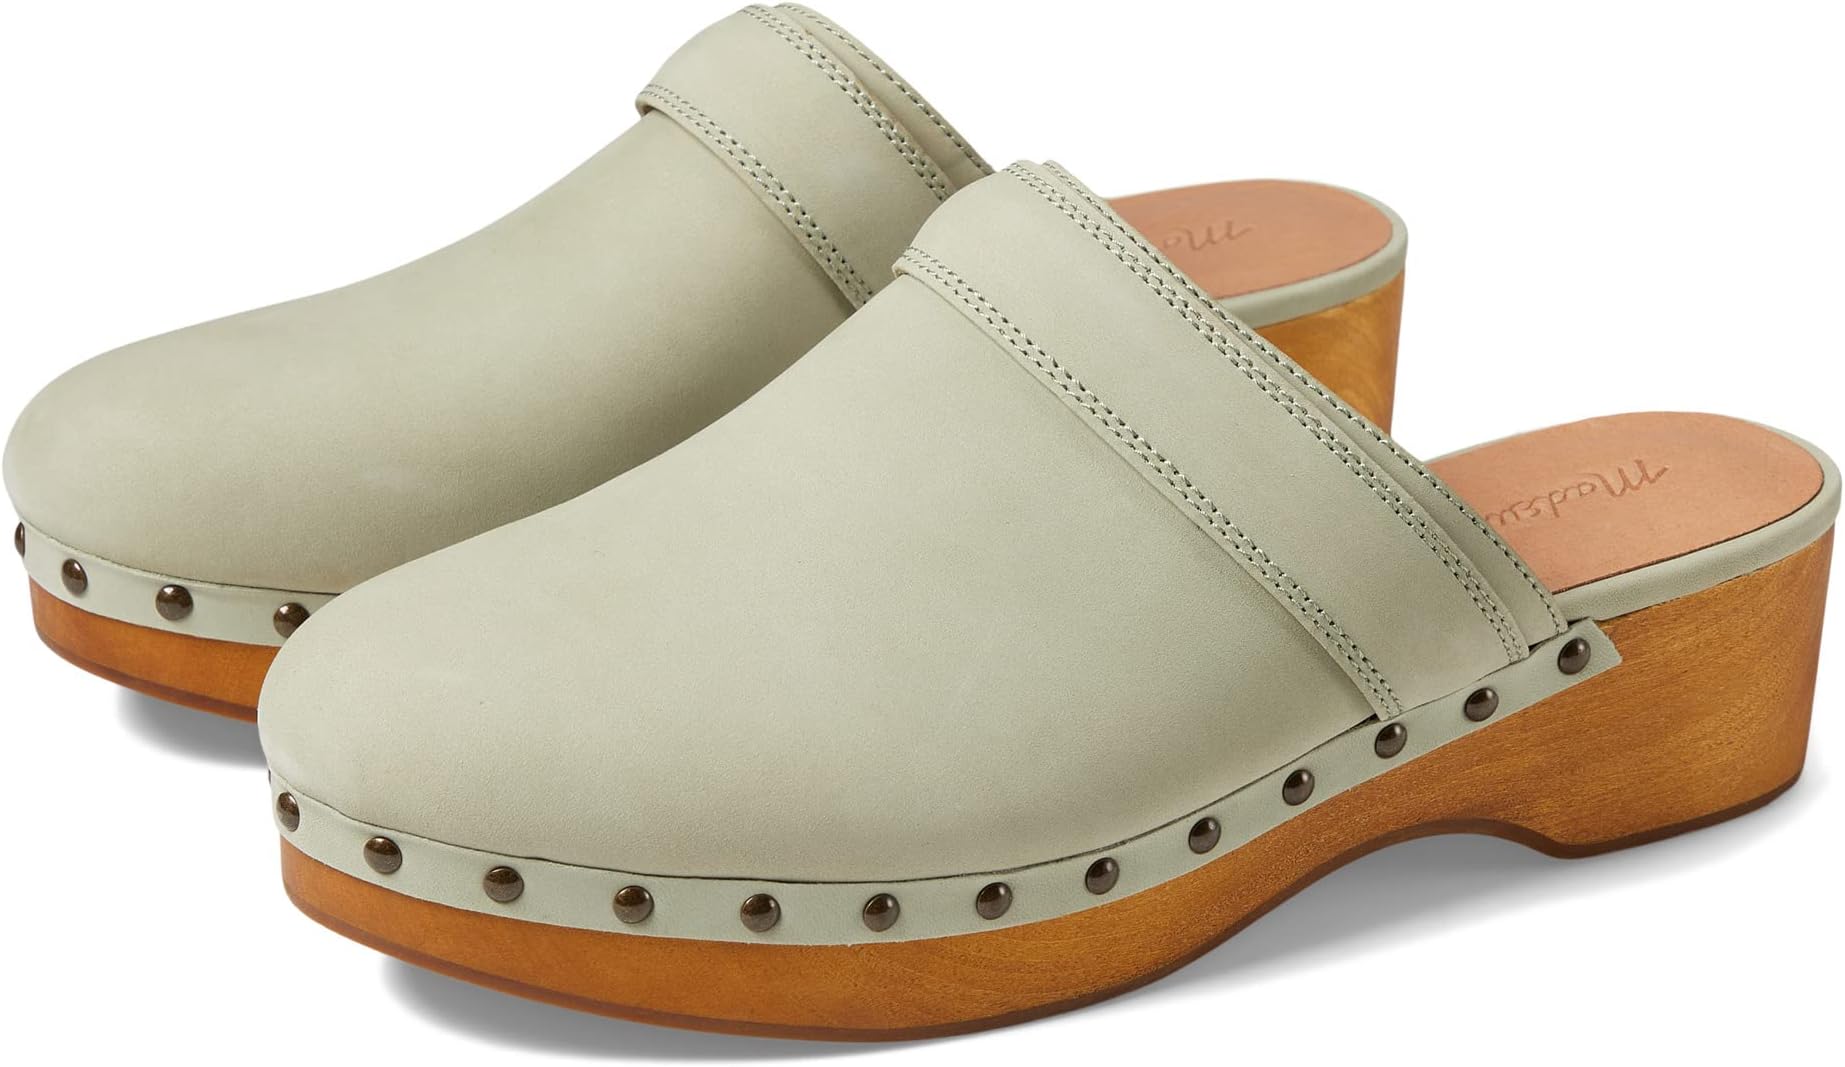 Сабо The Cecily Clog in Nubuck Madewell, цвет Forgotten Landscape